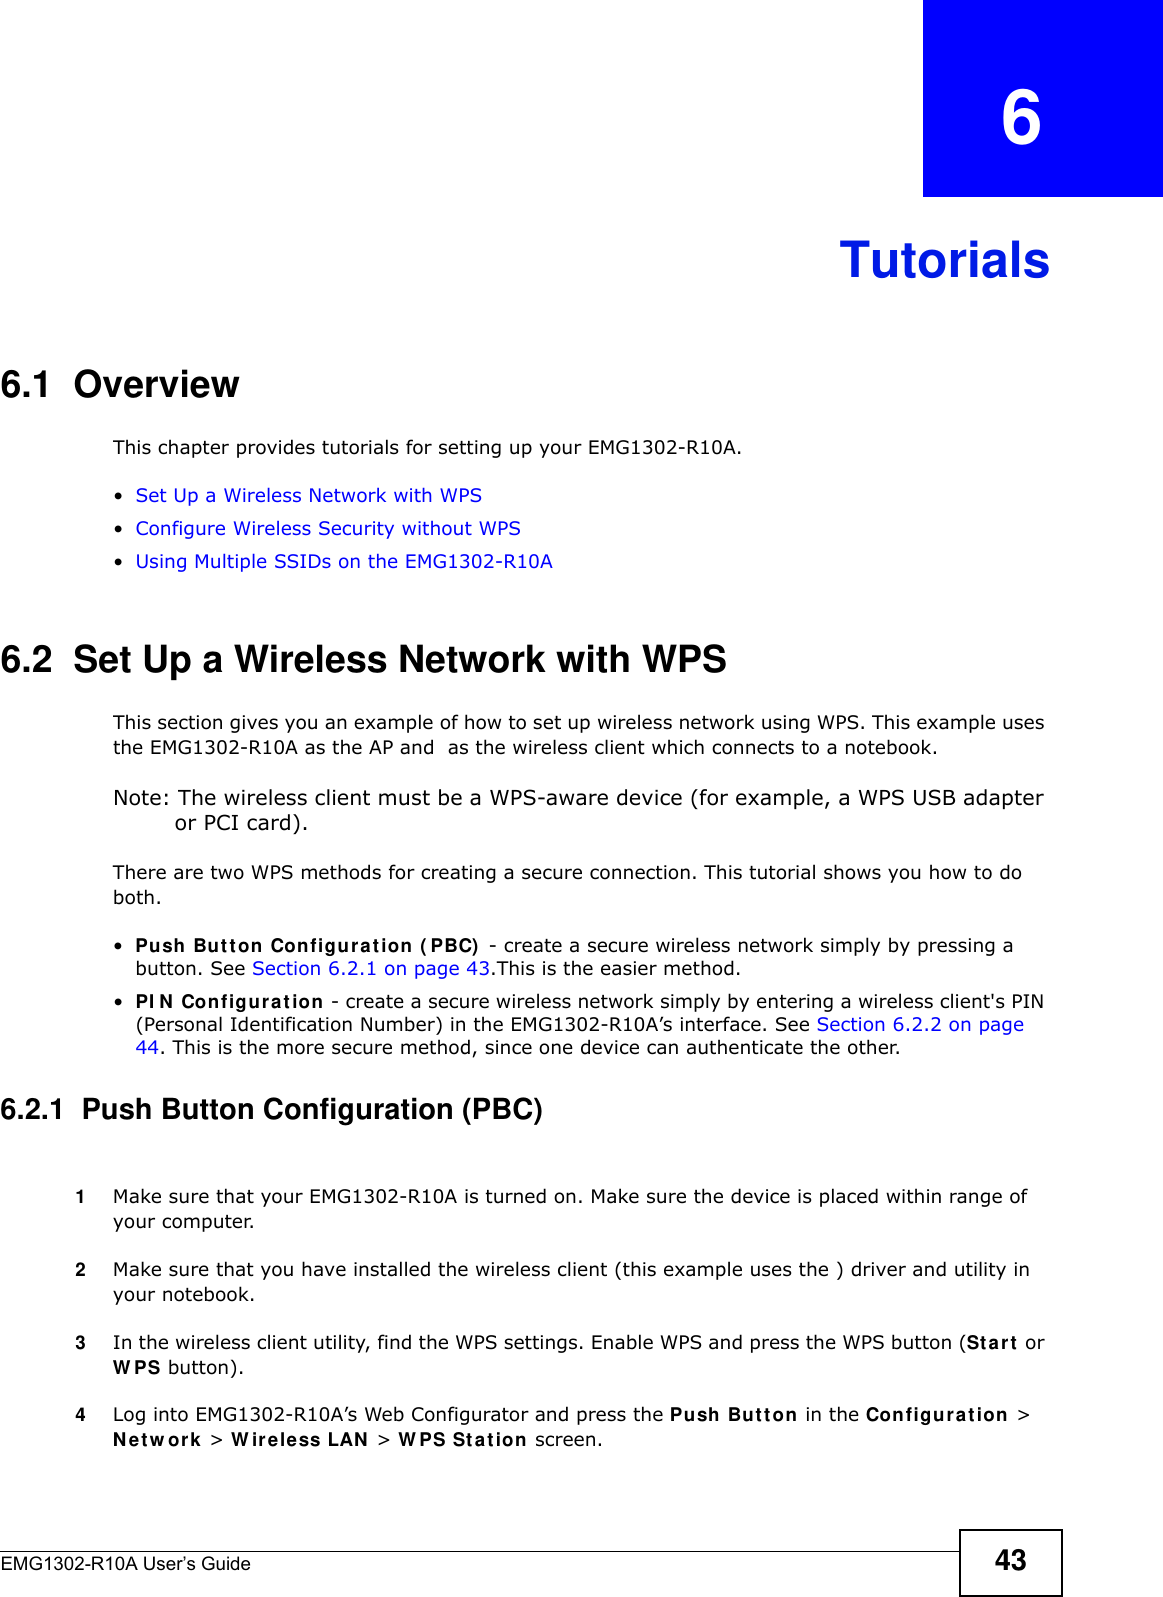 EMG1302-R10A User’s Guide 43CHAPTER   6Tutorials6.1  OverviewThis chapter provides tutorials for setting up your EMG1302-R10A.•Set Up a Wireless Network with WPS•Configure Wireless Security without WPS•Using Multiple SSIDs on the EMG1302-R10A6.2  Set Up a Wireless Network with WPSThis section gives you an example of how to set up wireless network using WPS. This example uses the EMG1302-R10A as the AP and  as the wireless client which connects to a notebook.Note: The wireless client must be a WPS-aware device (for example, a WPS USB adapter or PCI card).There are two WPS methods for creating a secure connection. This tutorial shows you how to do both.•Push But t on Configurat ion ( PBC)  - create a secure wireless network simply by pressing a button. See Section 6.2.1 on page 43.This is the easier method.•PI N  Configuration - create a secure wireless network simply by entering a wireless client&apos;s PIN (Personal Identification Number) in the EMG1302-R10A’s interface. See Section 6.2.2 on page 44. This is the more secure method, since one device can authenticate the other.6.2.1  Push Button Configuration (PBC)1Make sure that your EMG1302-R10A is turned on. Make sure the device is placed within range of your computer.2Make sure that you have installed the wireless client (this example uses the ) driver and utility in your notebook.3In the wireless client utility, find the WPS settings. Enable WPS and press the WPS button (St a r t  or W PS button).4Log into EMG1302-R10A’s Web Configurator and press the Push Butt on in the Configu r a t ion  &gt; N e t w ork &gt; W irele ss LAN  &gt; W PS St a t ion screen.